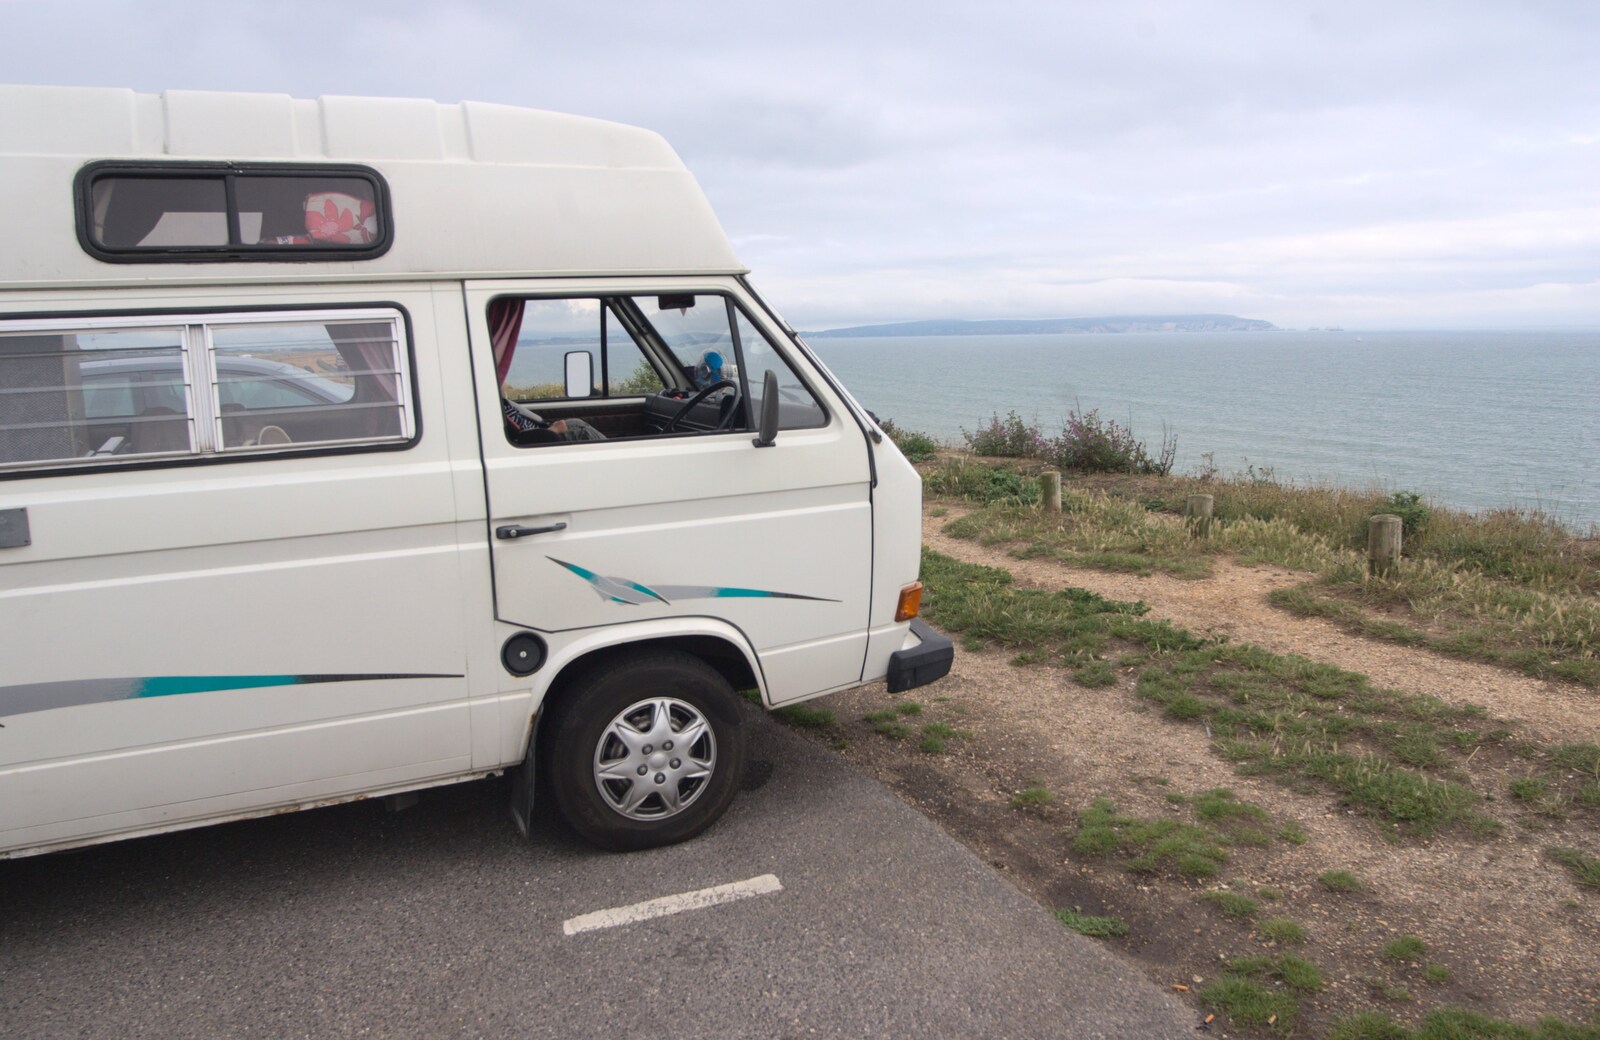 The Van looks out to sea from A Camper Van Odyssey: Oxford, Salisbury, New Forest and Barton-on-Sea - 19th June 2011